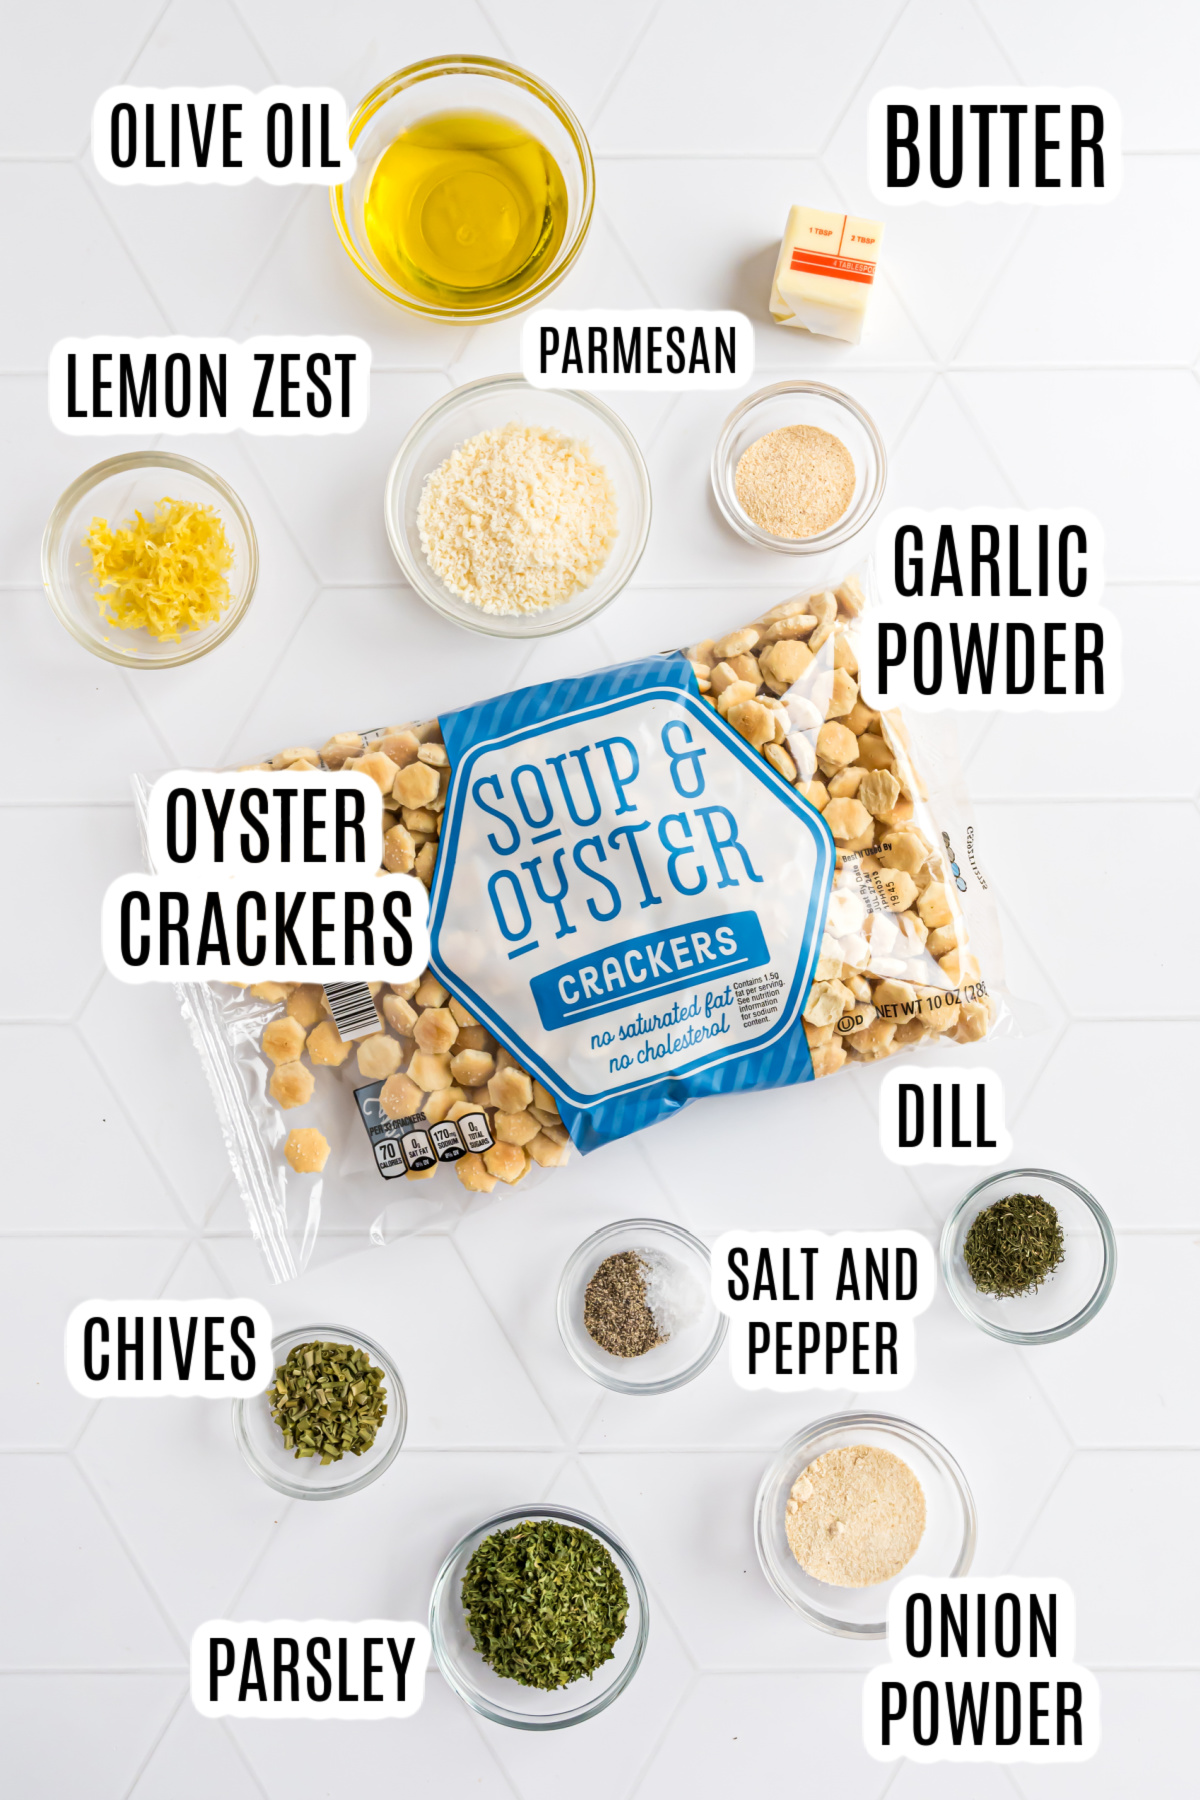 The ingredients required to make this Soup Cracker Recipe include: oyster crackers, butter, olive oil, dried dill, salt and pepper, dried chives, dried parsley, onion powder, garlic powder, and parmesan cheese.